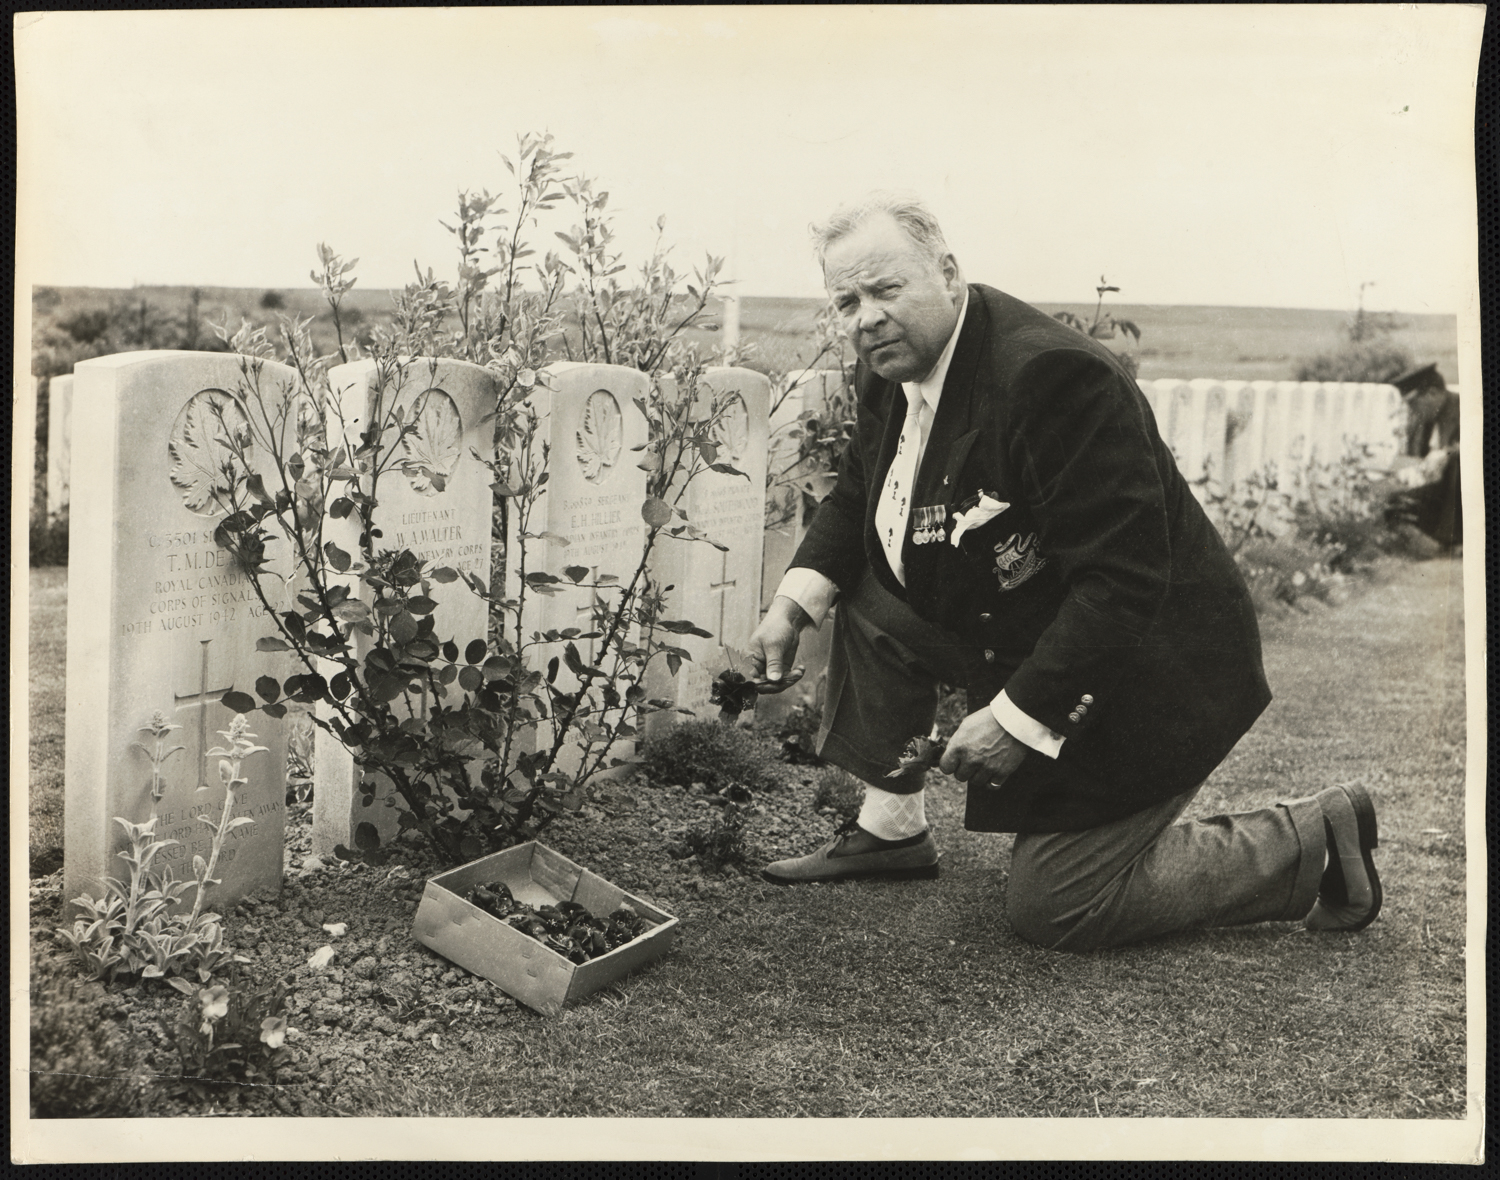 Then Mayor Allan Lamport laying flowers on the graves of Toronto soldiers at the Dieppe Canadian War Cemetery, Hautot-Sur-Mer in France